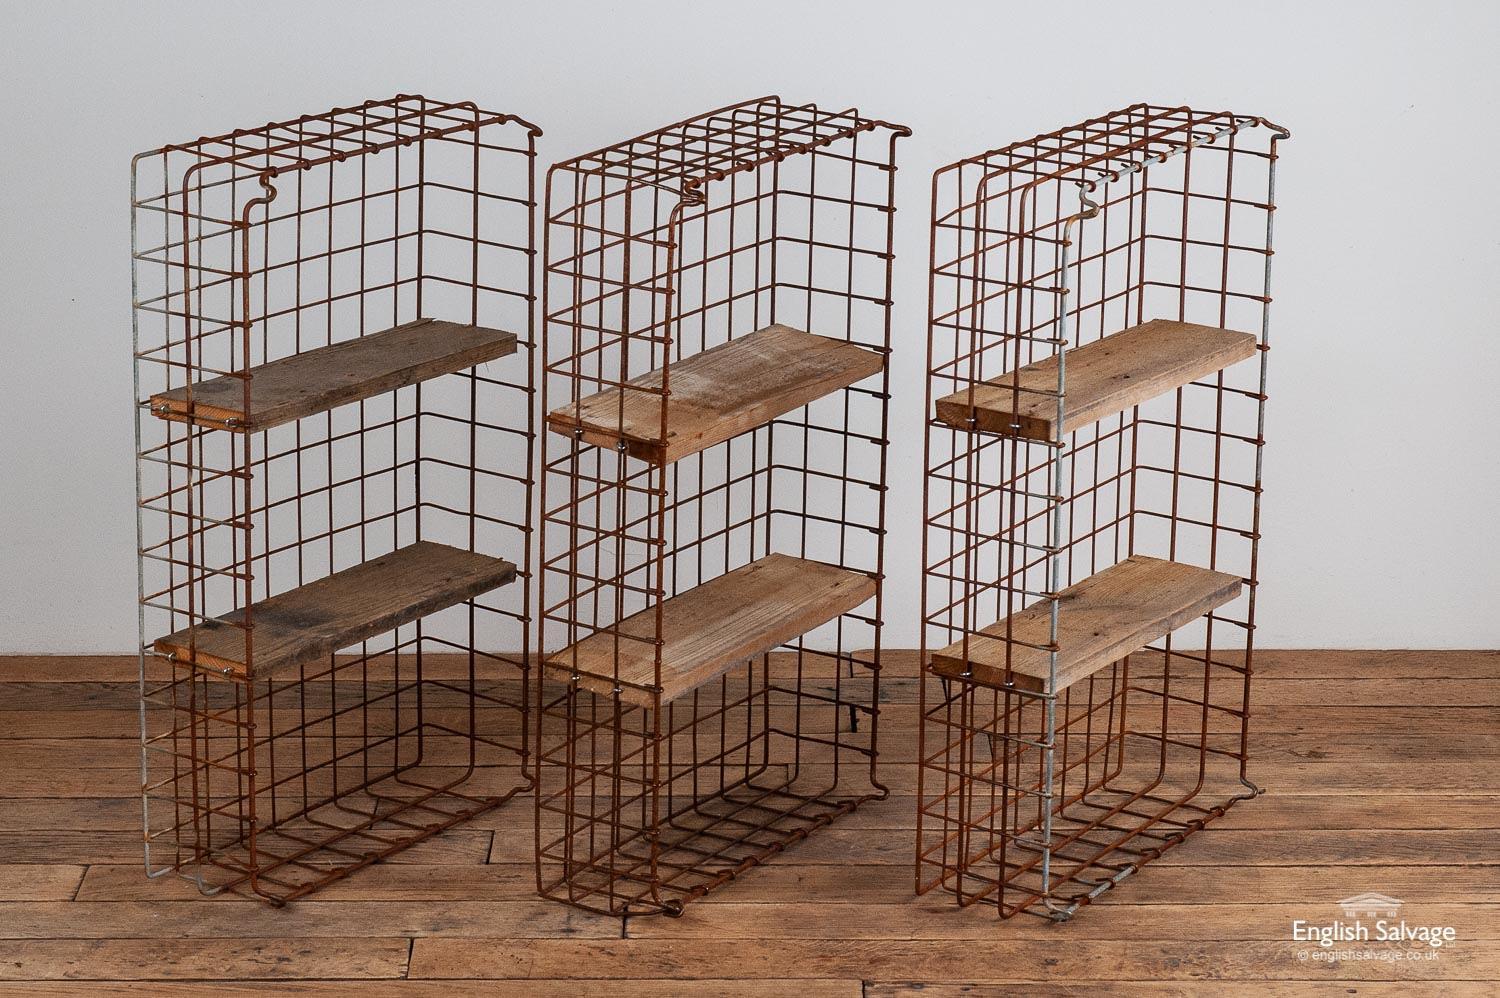 Vintage wirework bread storage baskets which have been repurposed into shelving units, each with two rustic reclaimed pine plank shelves (13cm deep). One shelving unit only has a single pine shelf, all the others have two shelves each. Maximum size